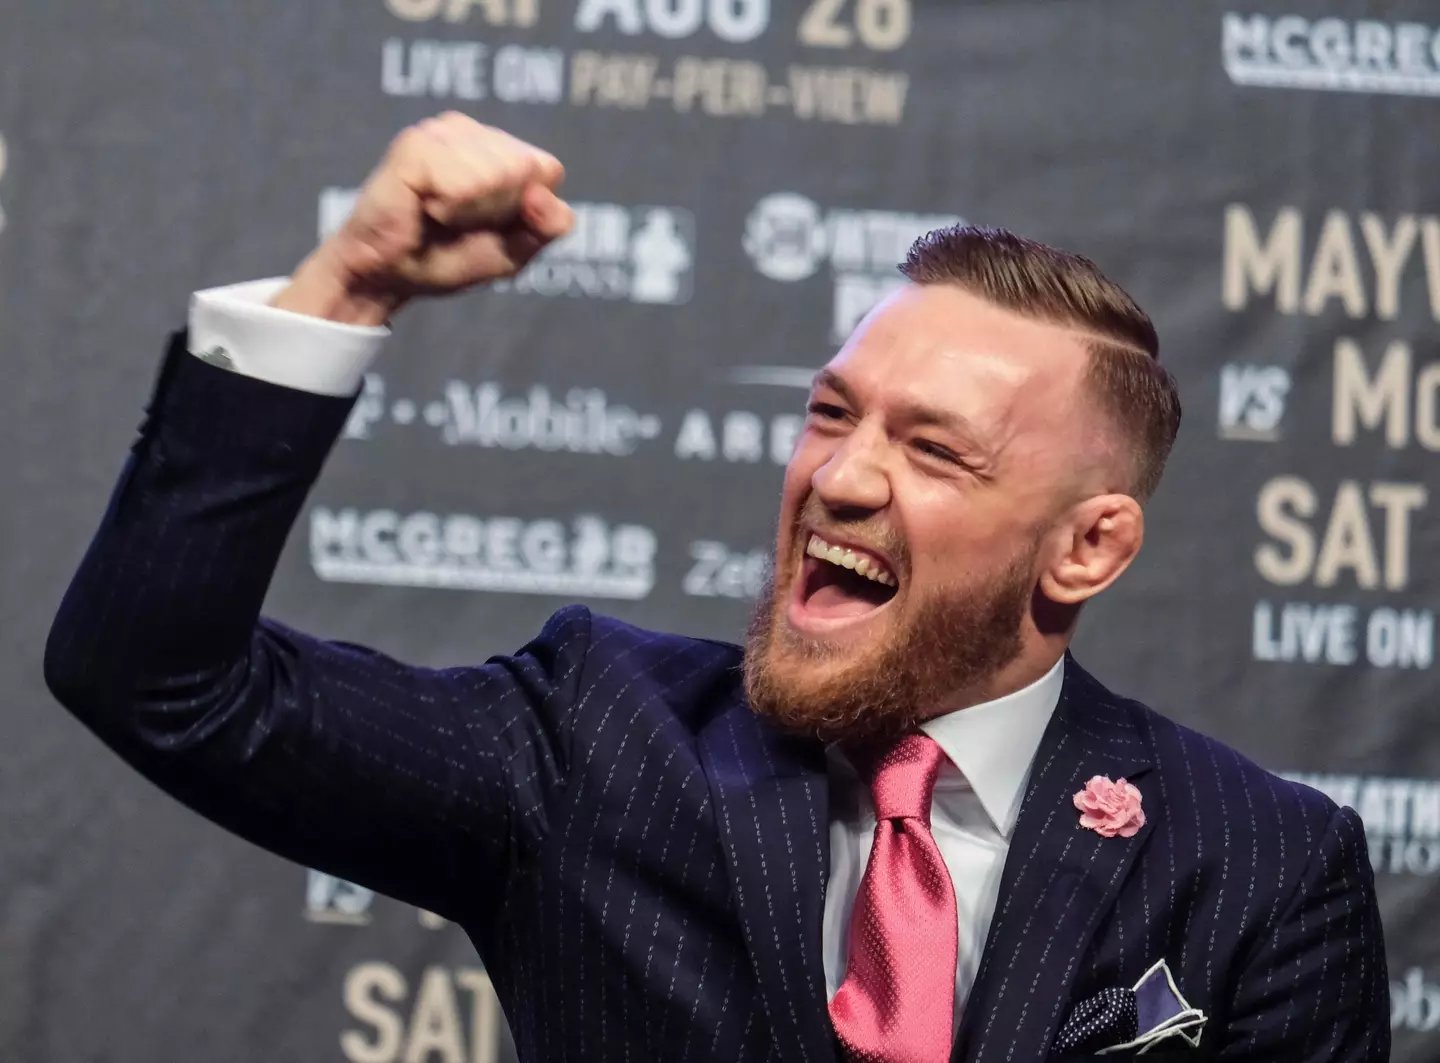 McGregor was back on his feet after the accident.